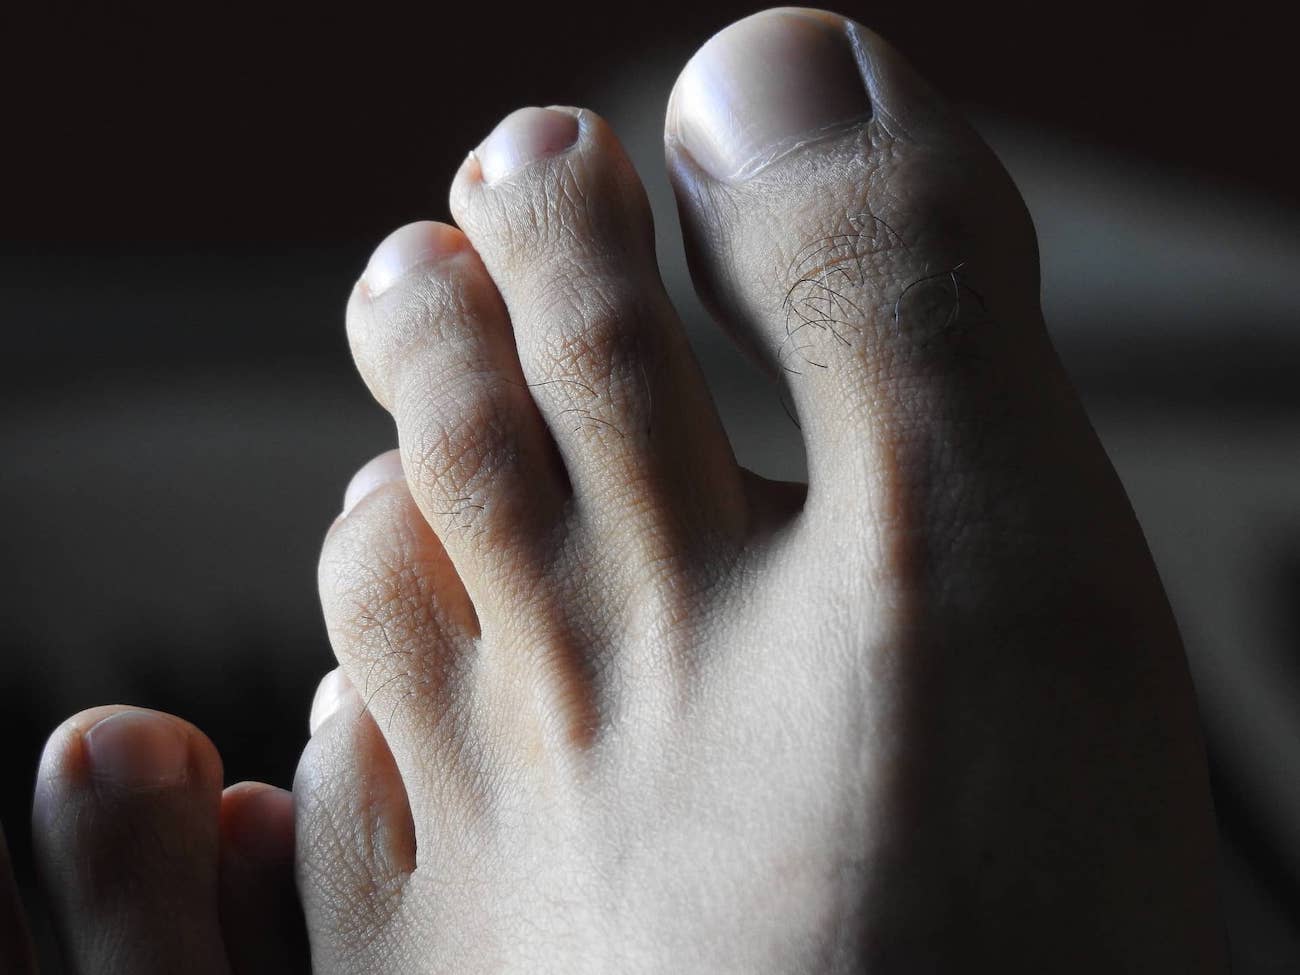 10 Ways To Remove Dead Skin From Your Feet